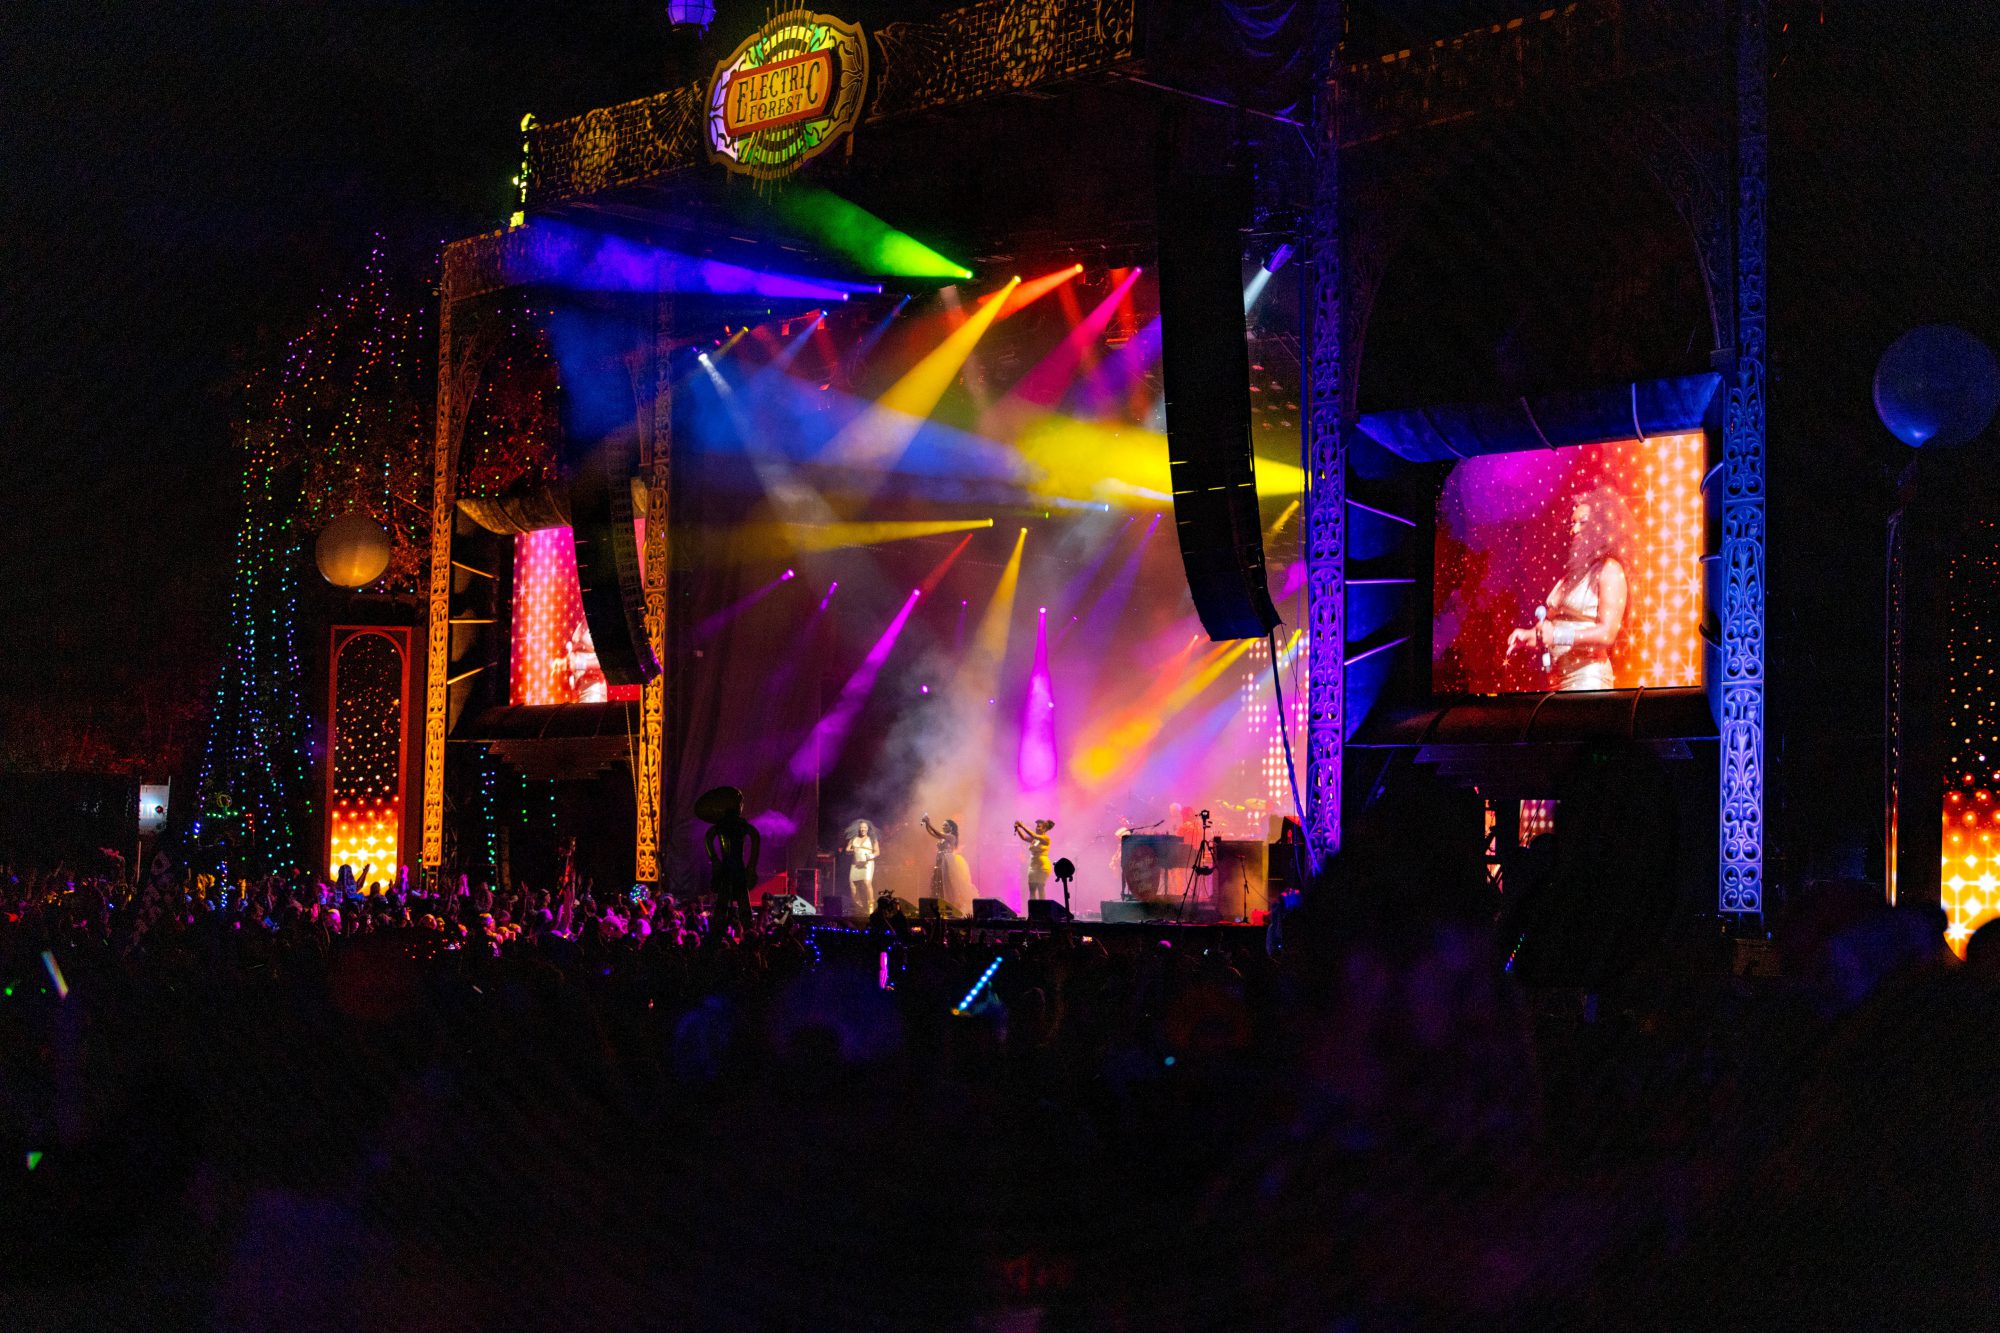 The String Cheese Incident at Electric Forest